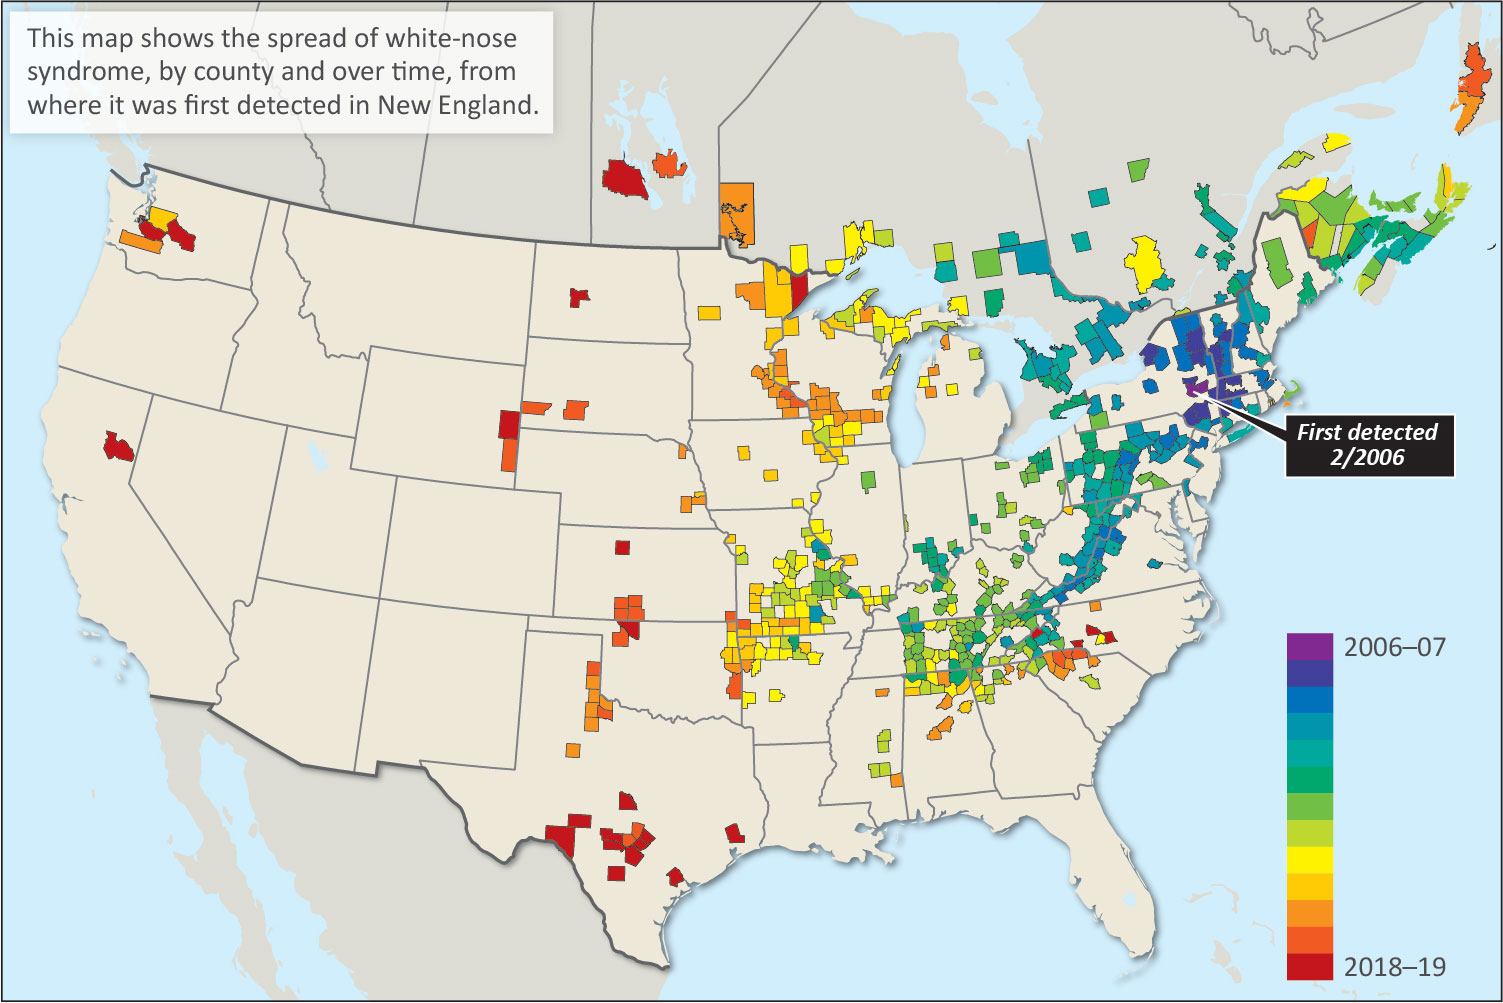 A map showing the spread of white-nose syndrome across the United States,